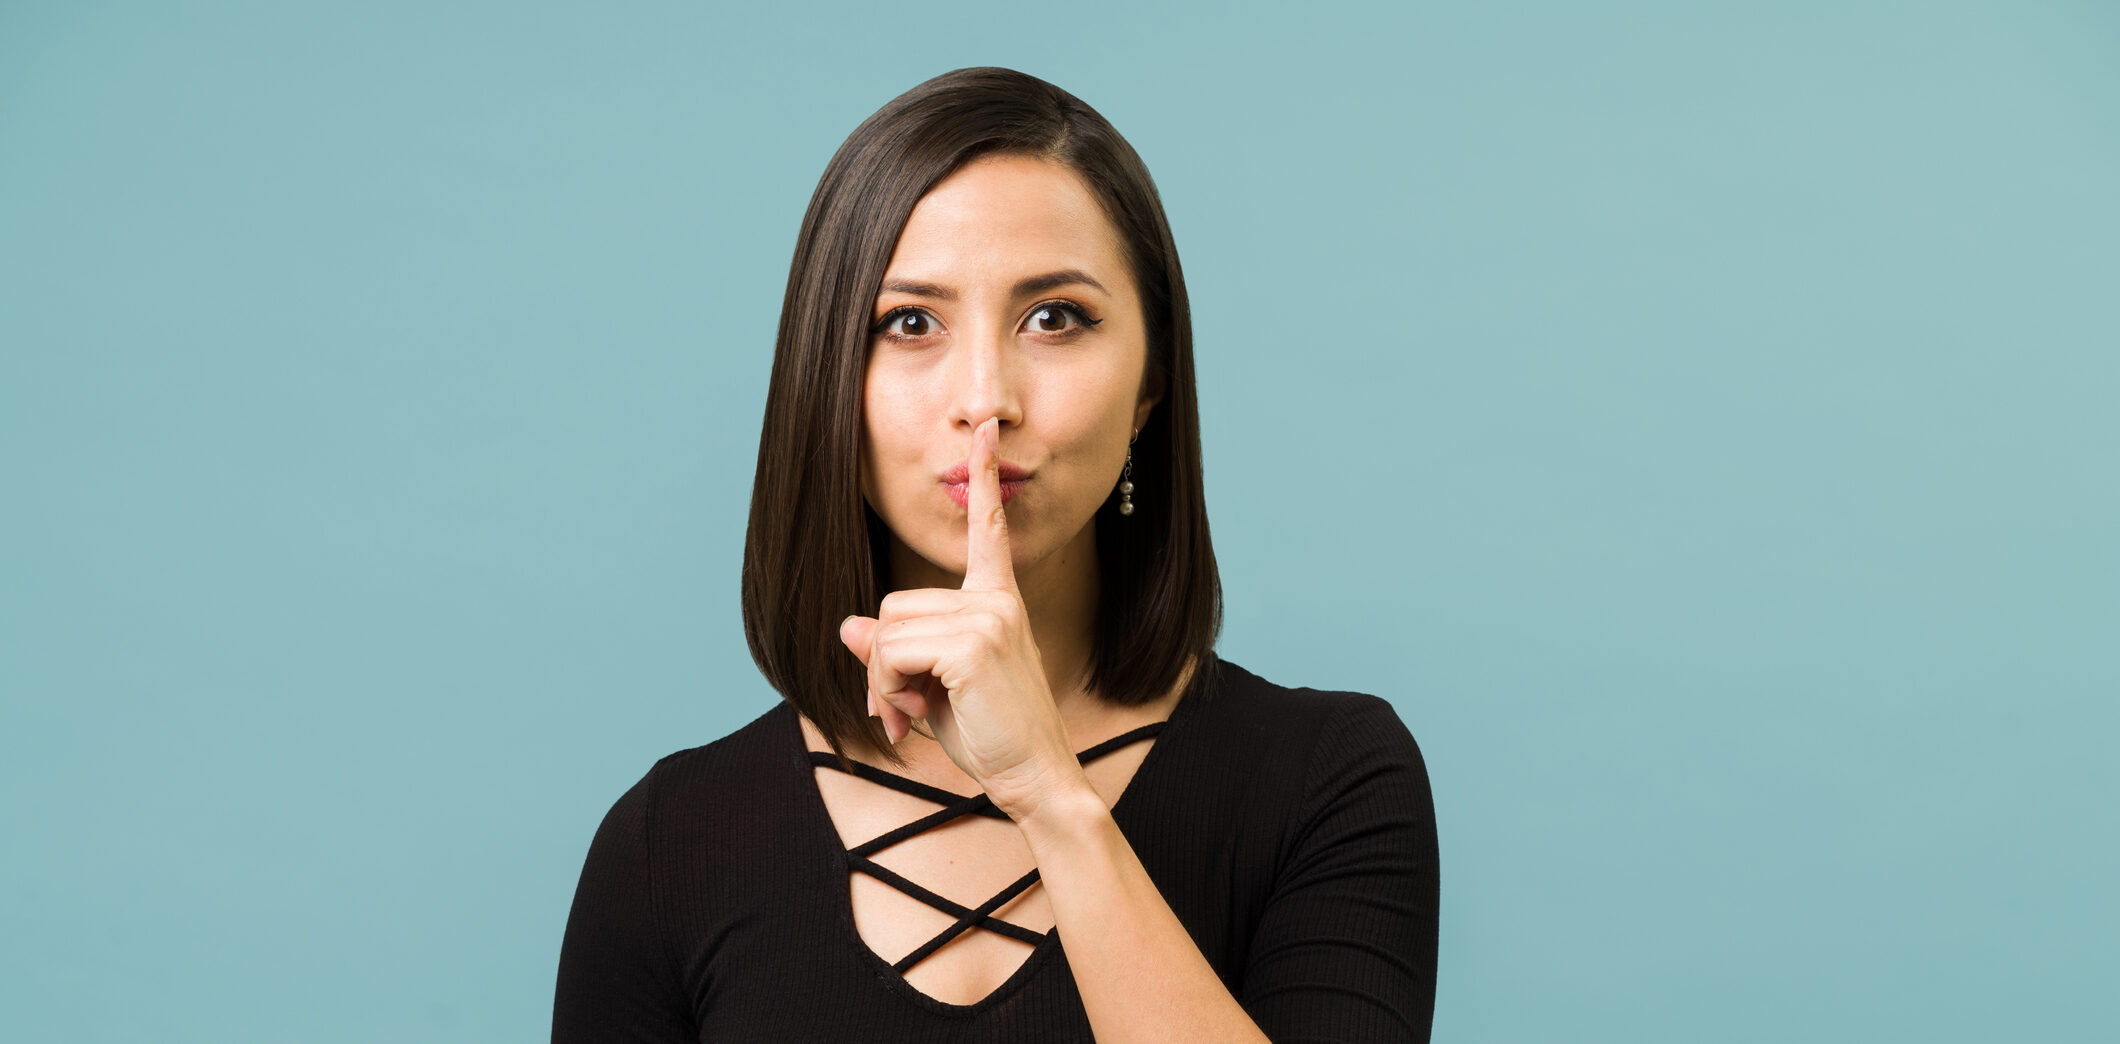 Woman indicating a family secret with her finger over her mouth